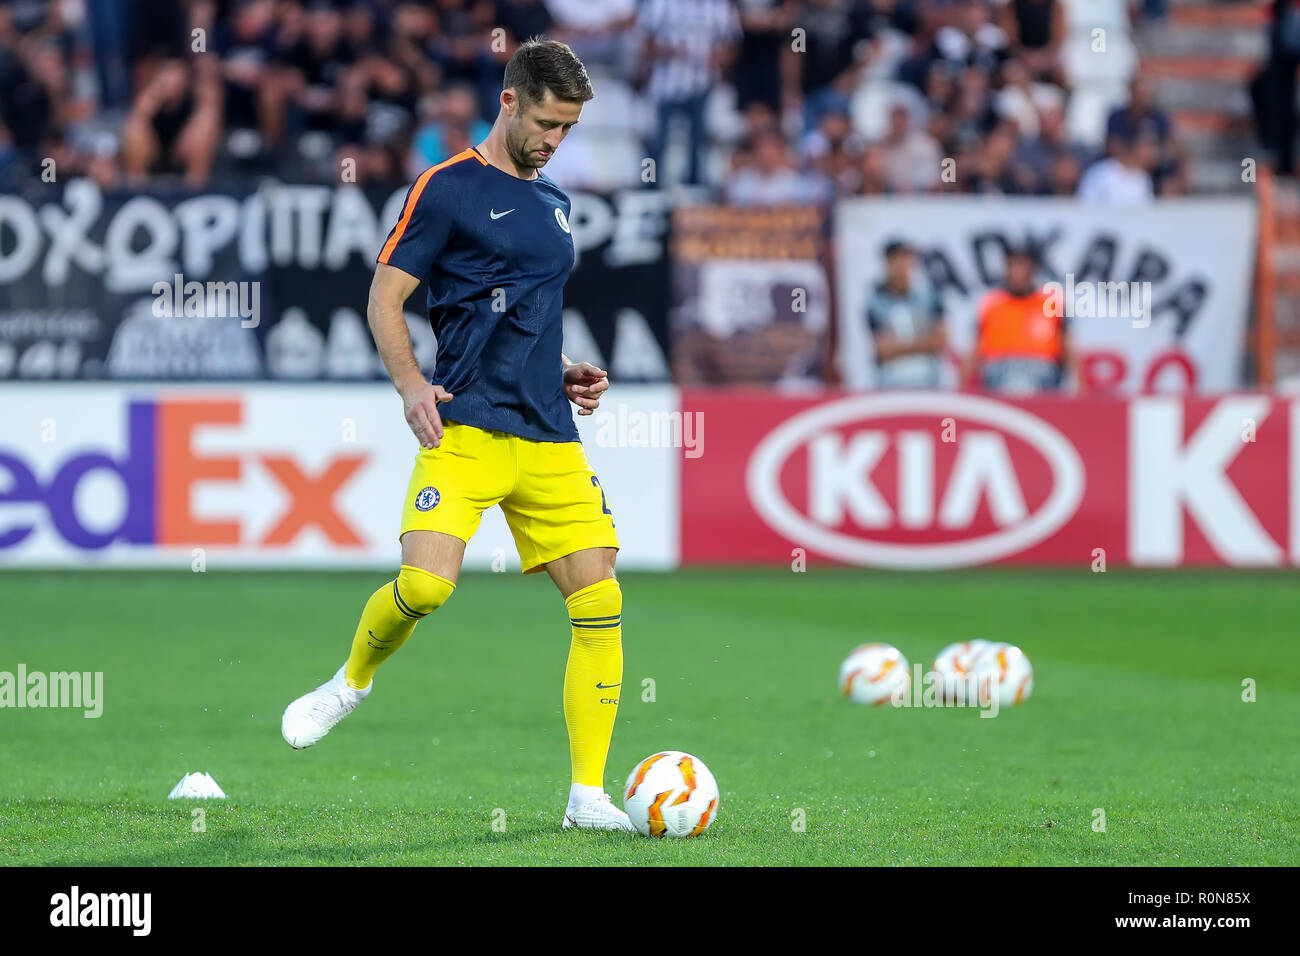 Thessaloniki, Greece - Sept 20, 2018: Player of Chelsea Gary Cahill in action during the UEFA Europa League between PAOK vs FC Chelsea played at Toumb Stock Photo